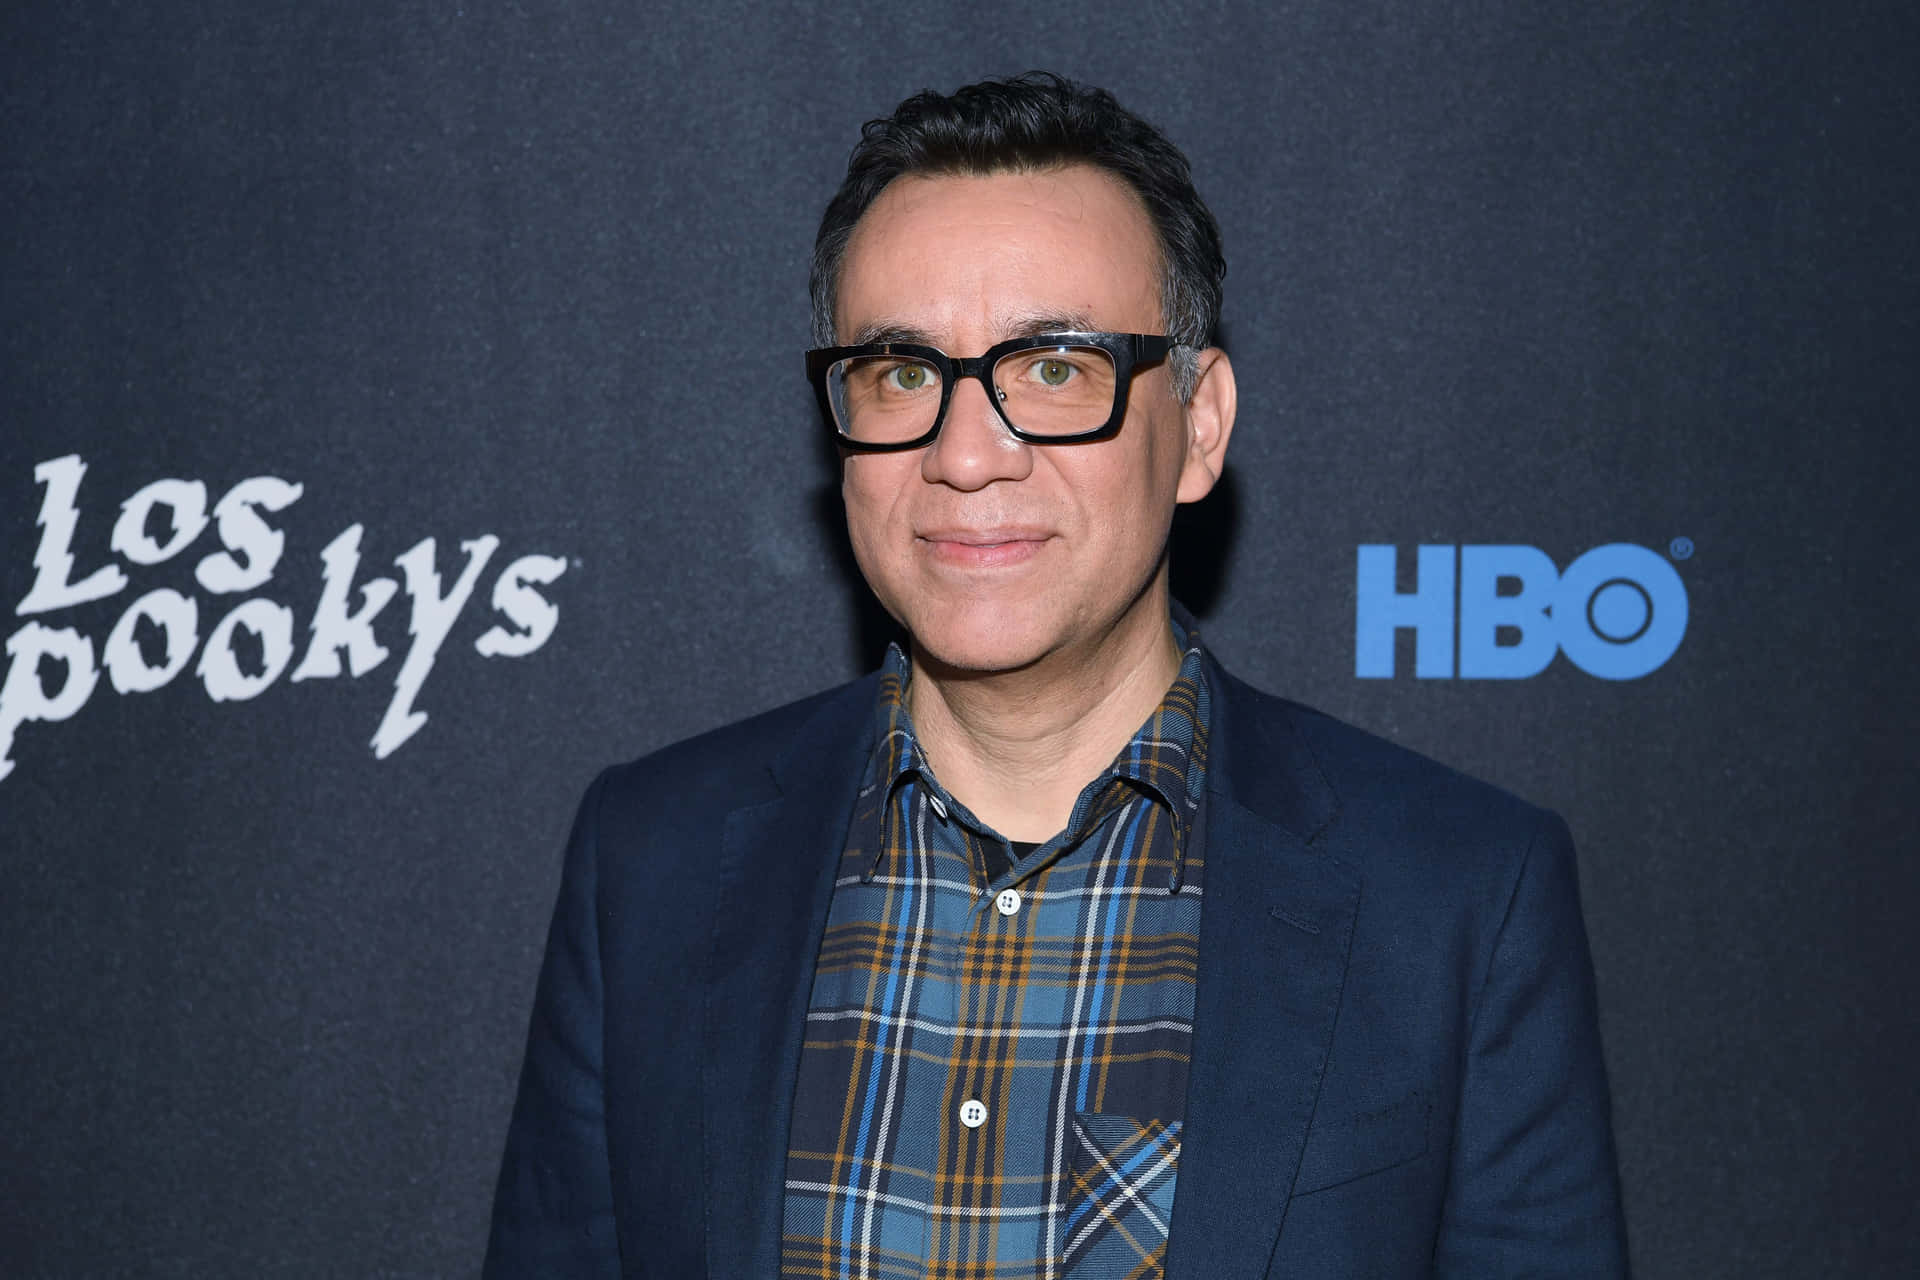 Fredarmisen Is An American Actor And Comedian Known For His Work On The Sketch Comedy Show 